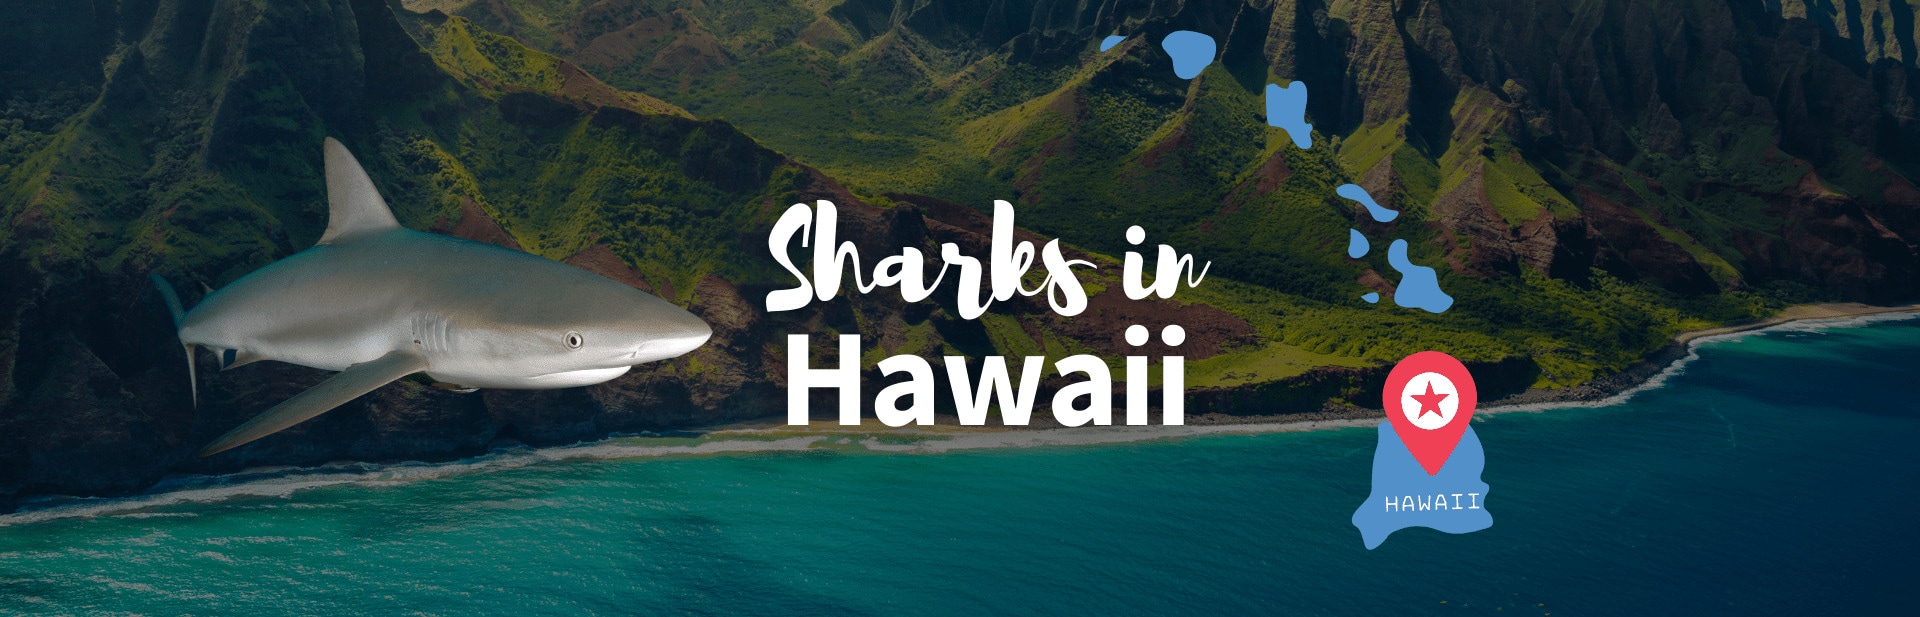 10 Most Common Sharks In Hawaii: Facts and Pictures